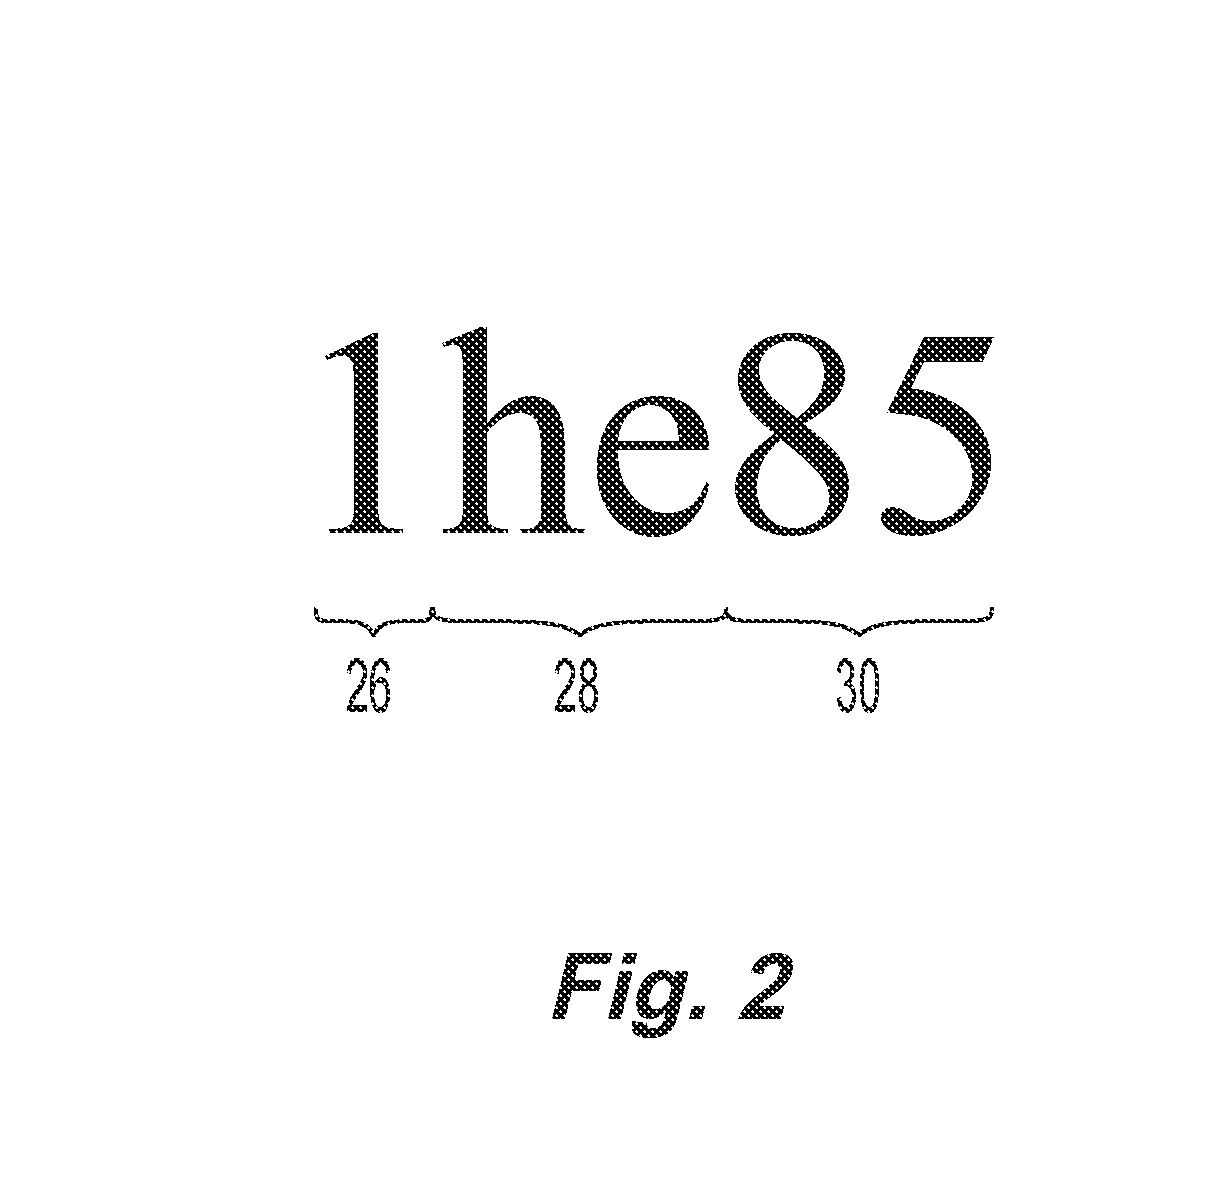 Method and Apparatus for for Predicting Text